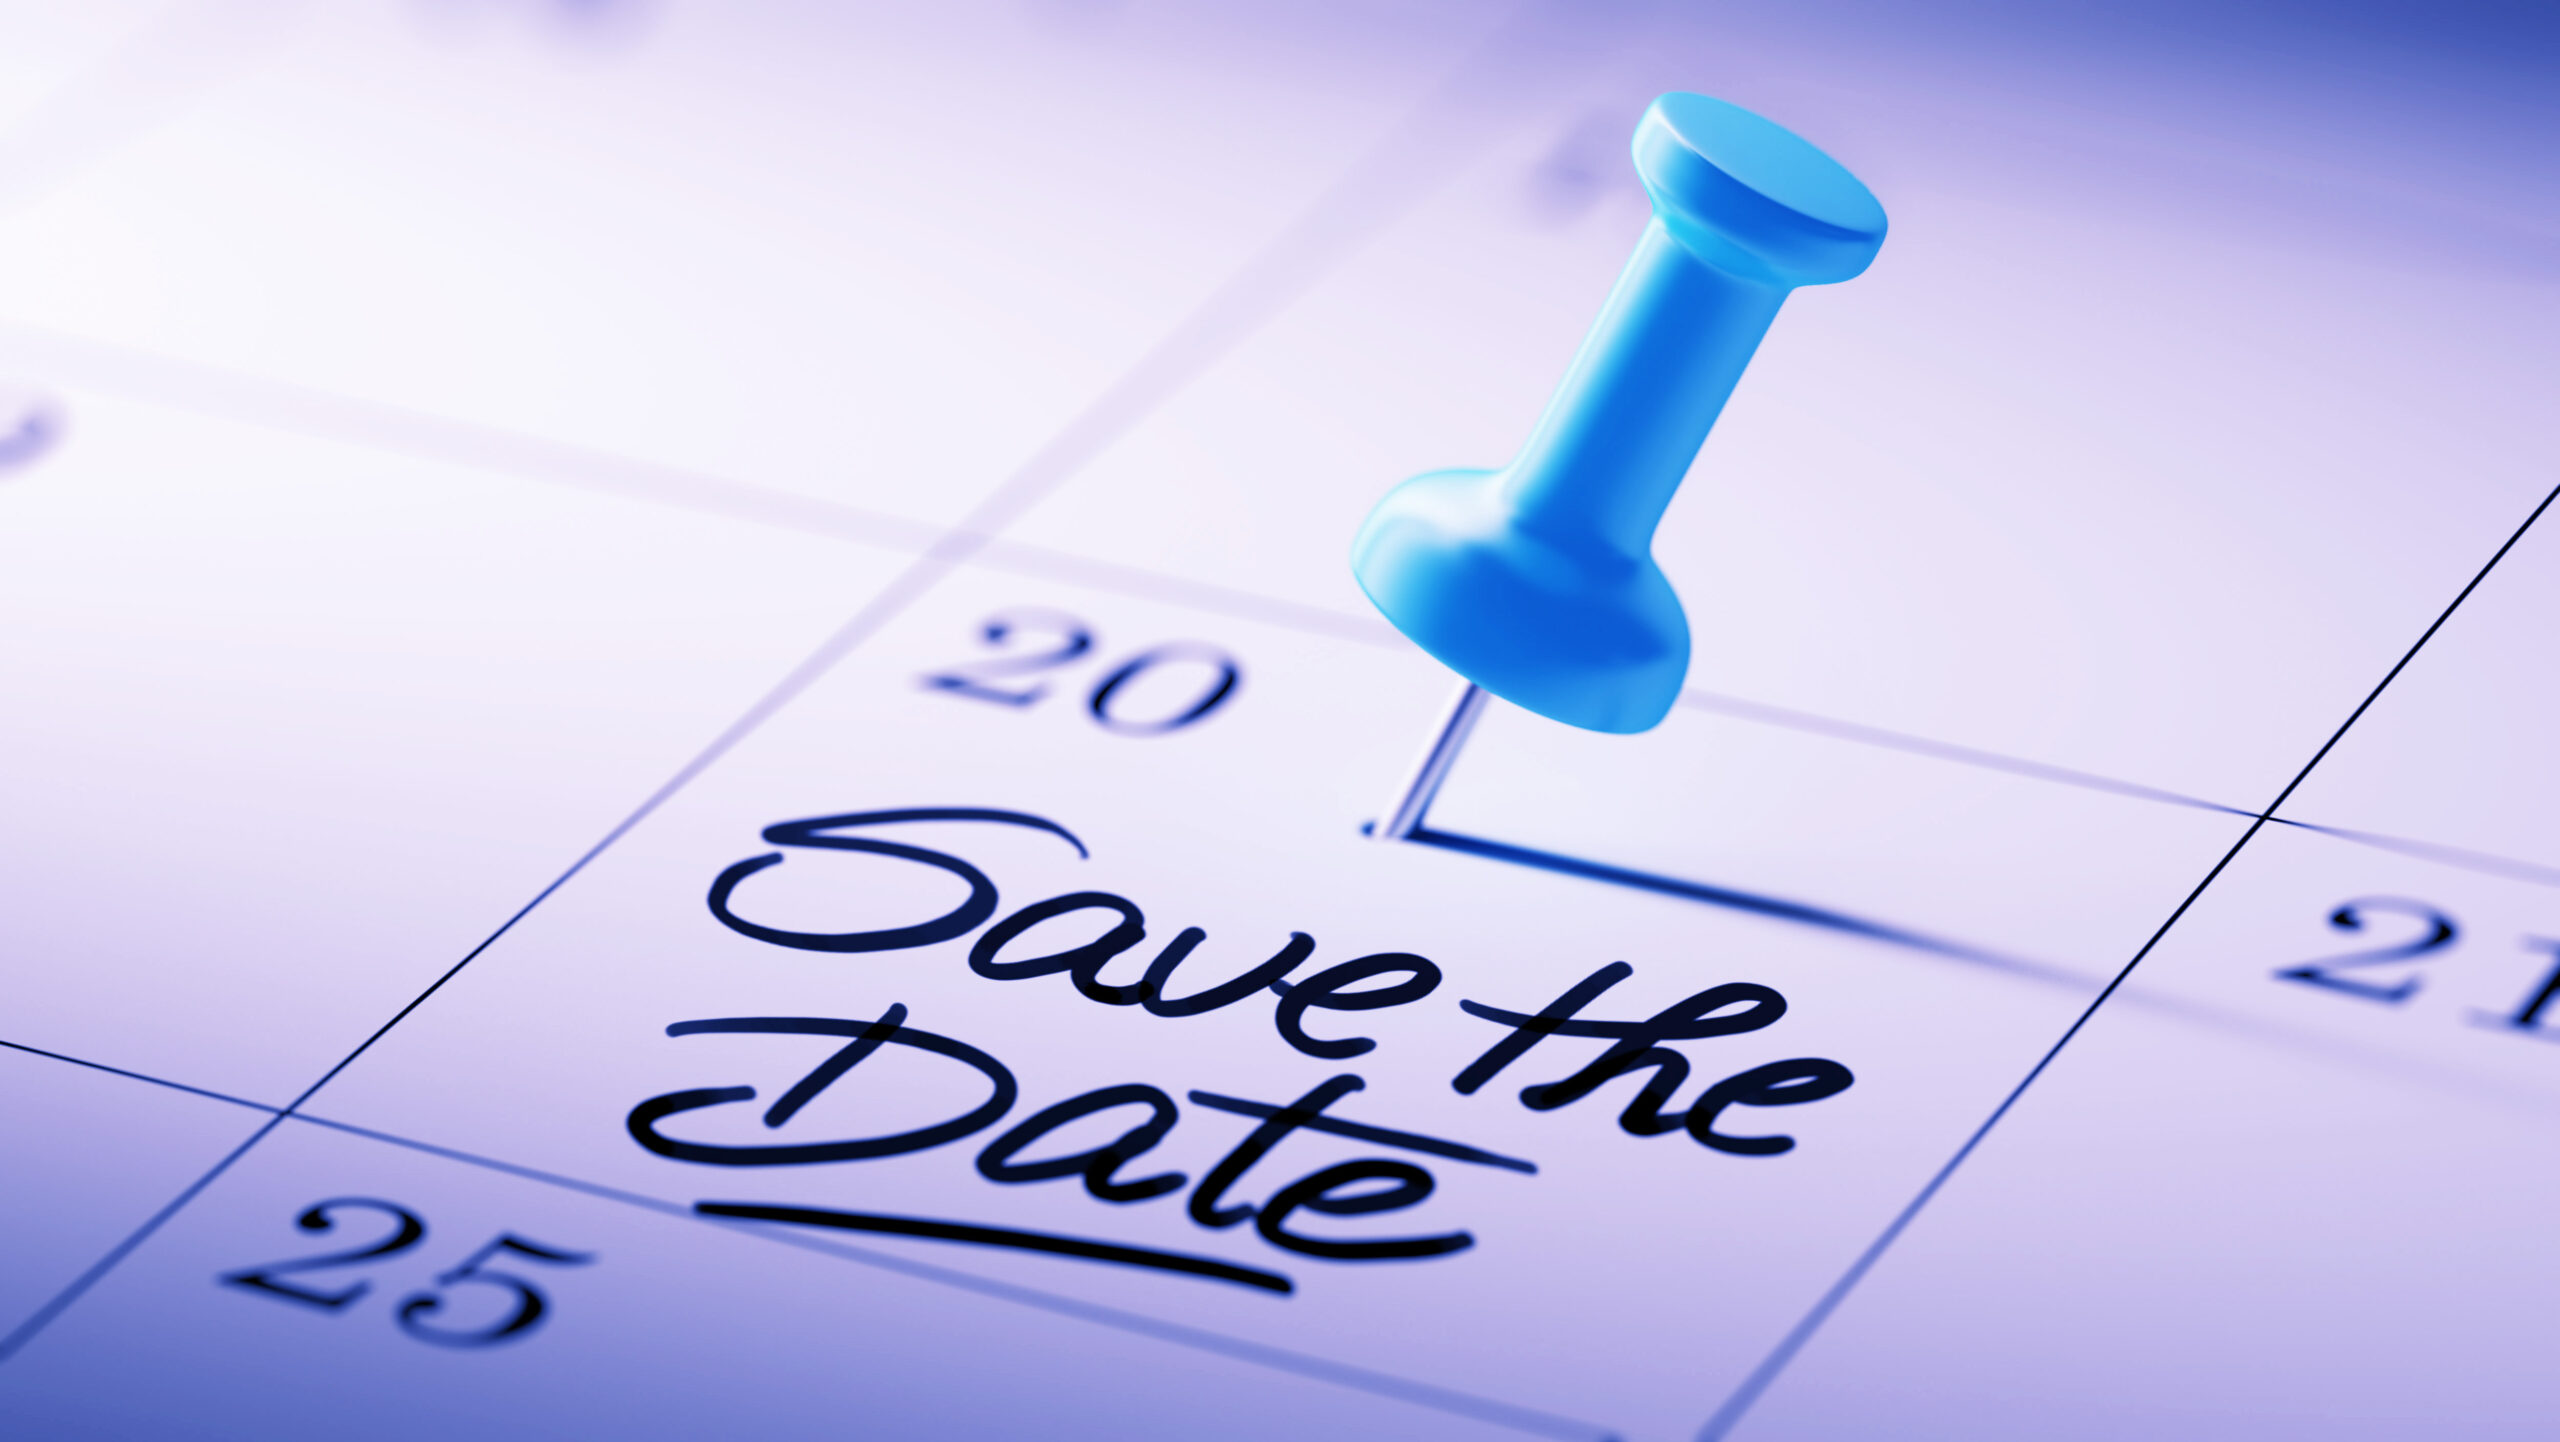 Concept image of a Calendar with a blue push pin